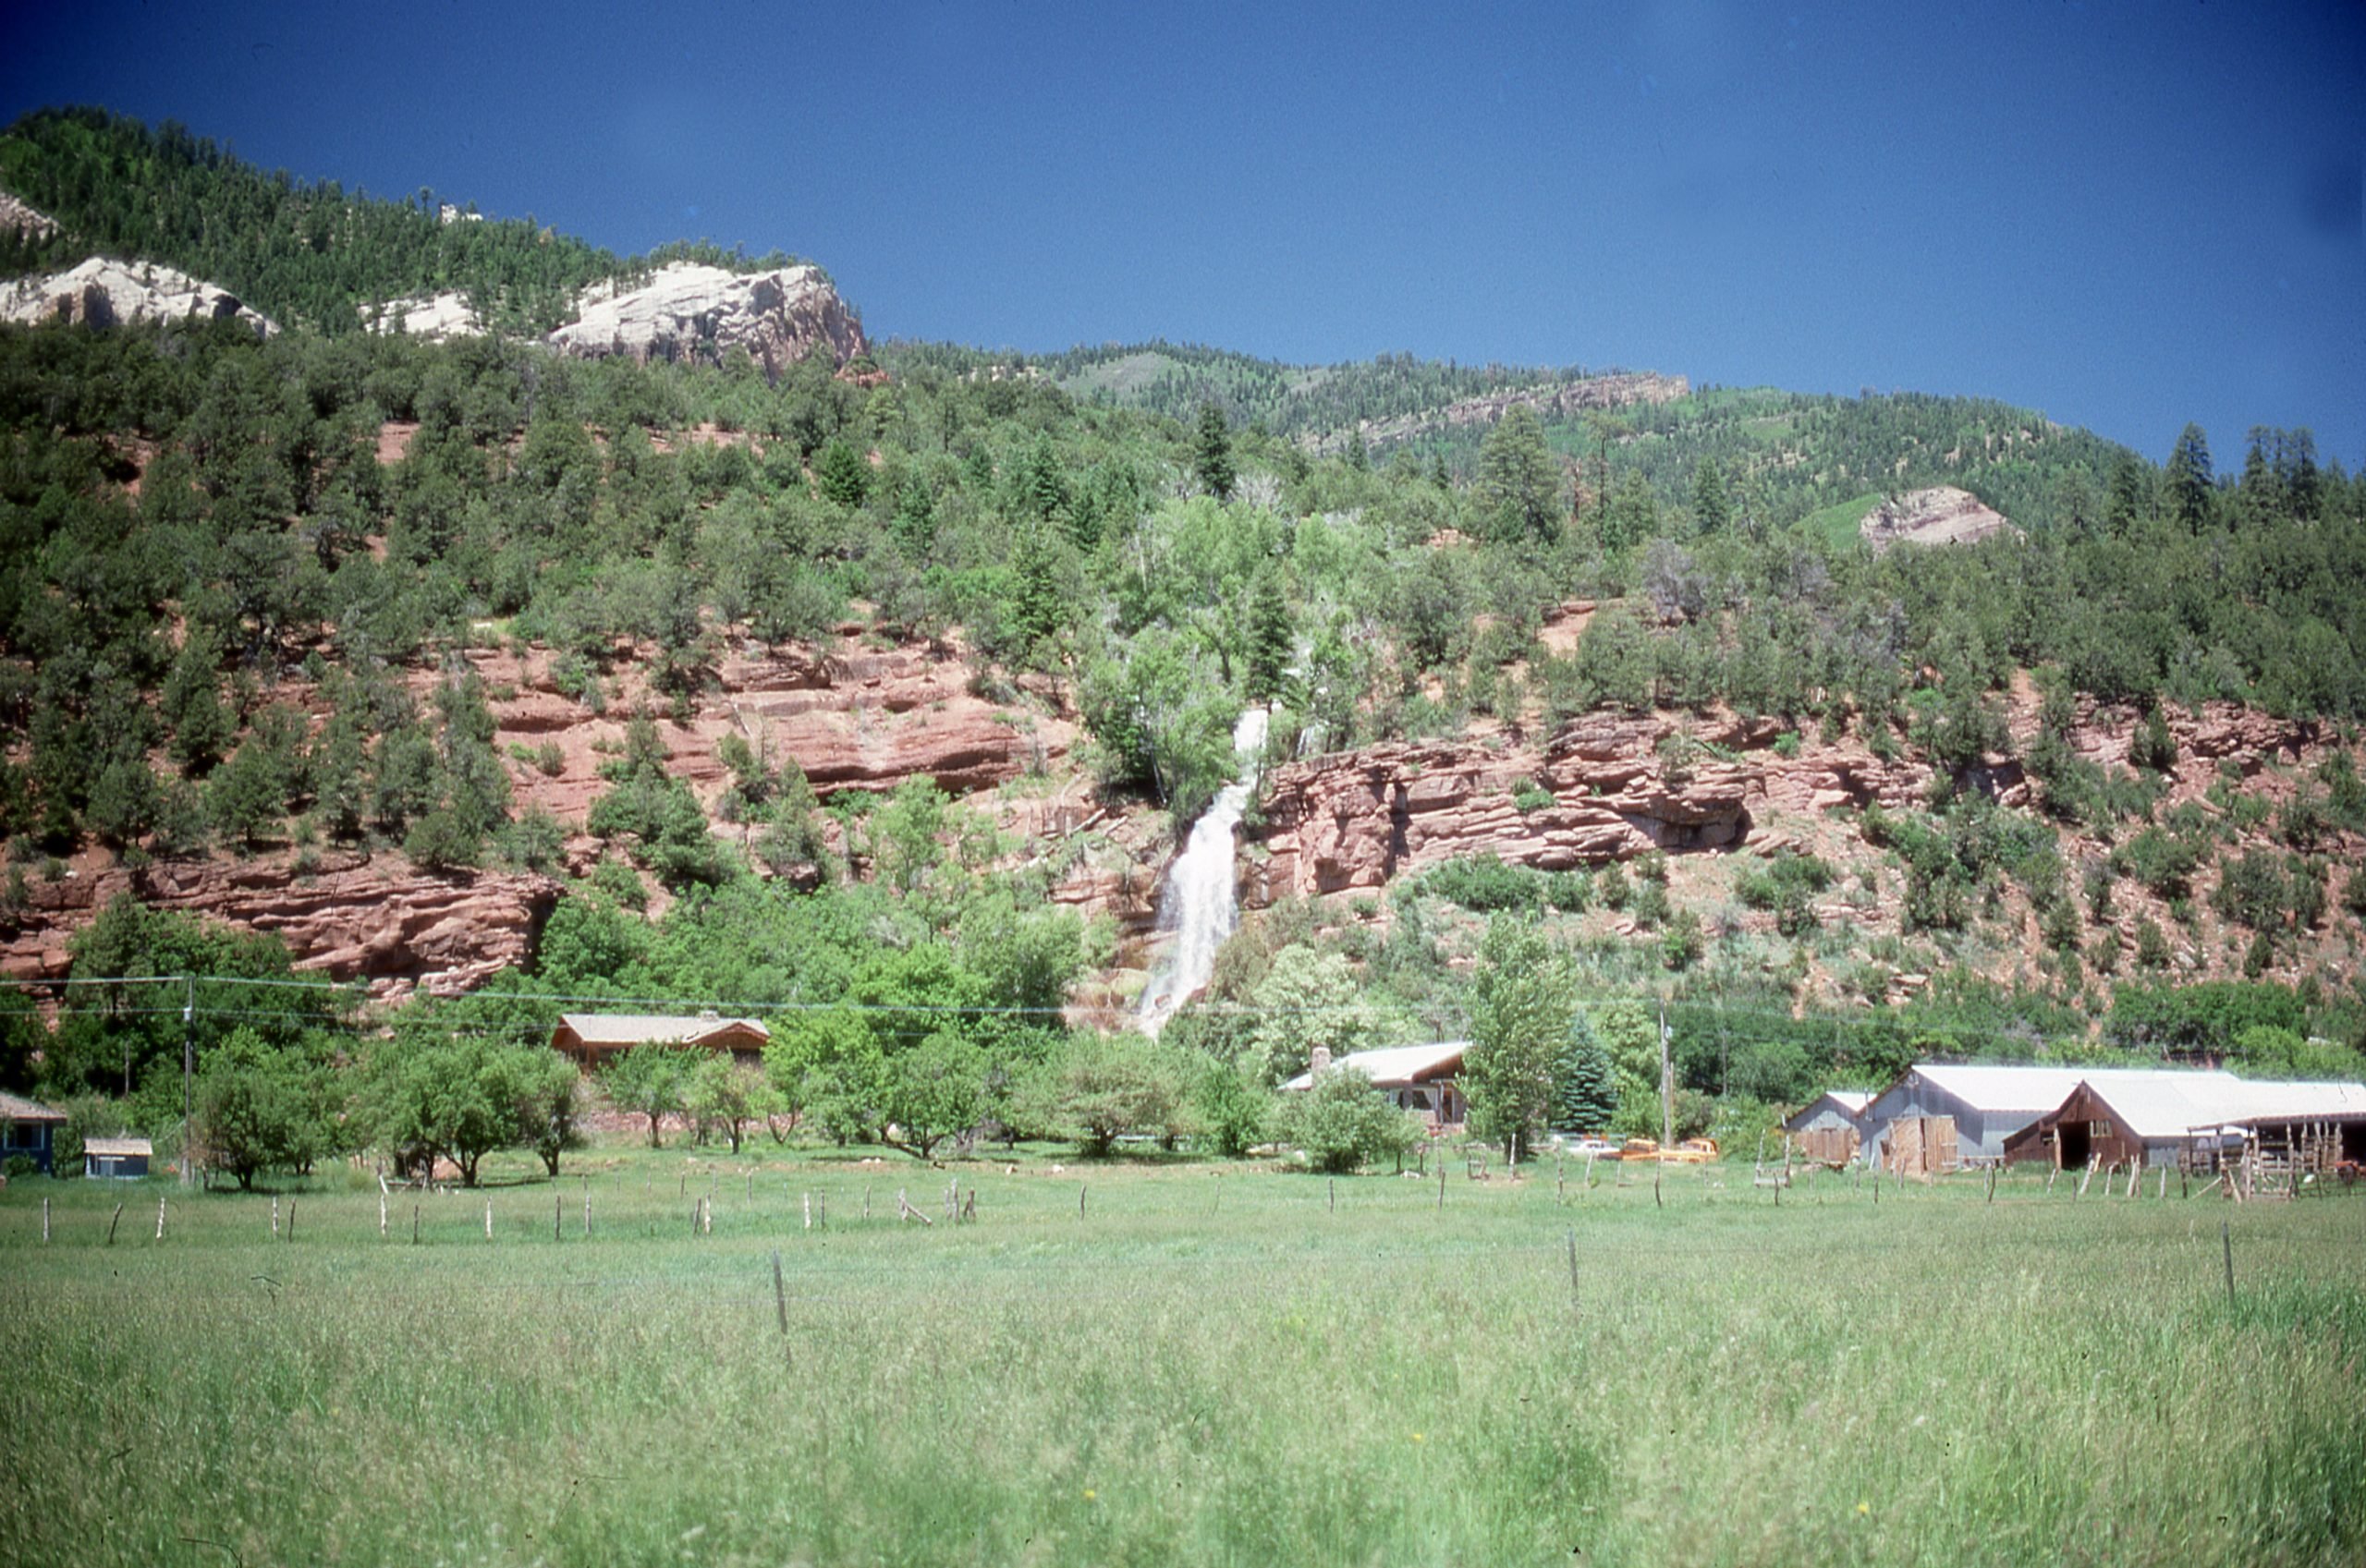 Ranch on a prairie field, with red clay cliffs in the background, a waterfall running through the cliffs, Arizona, 1970. (Photo by Smith Collection/Gado/Getty Images)